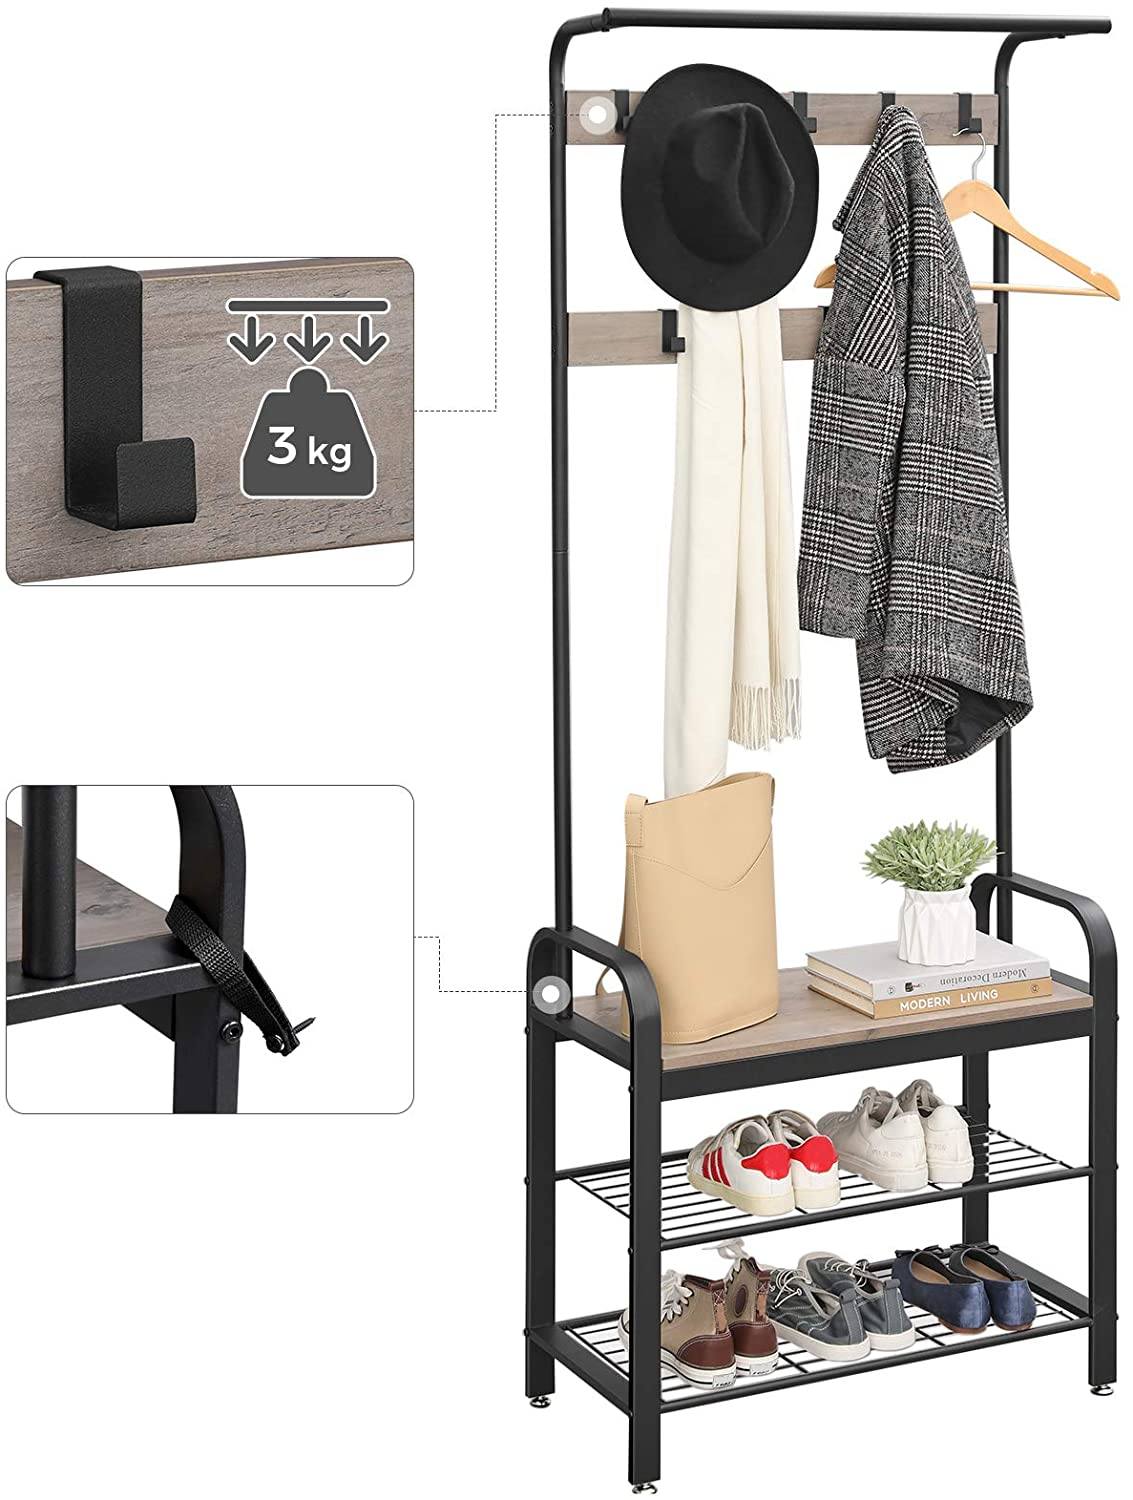 Coat Rack Stand, Hall Tree Free Standing, Coat Stand with Bench, Shoes Rack with Removable Hooks, Height 183 cm, metal, Industrial, Greige and Black HSR40MB RAW58.dk 